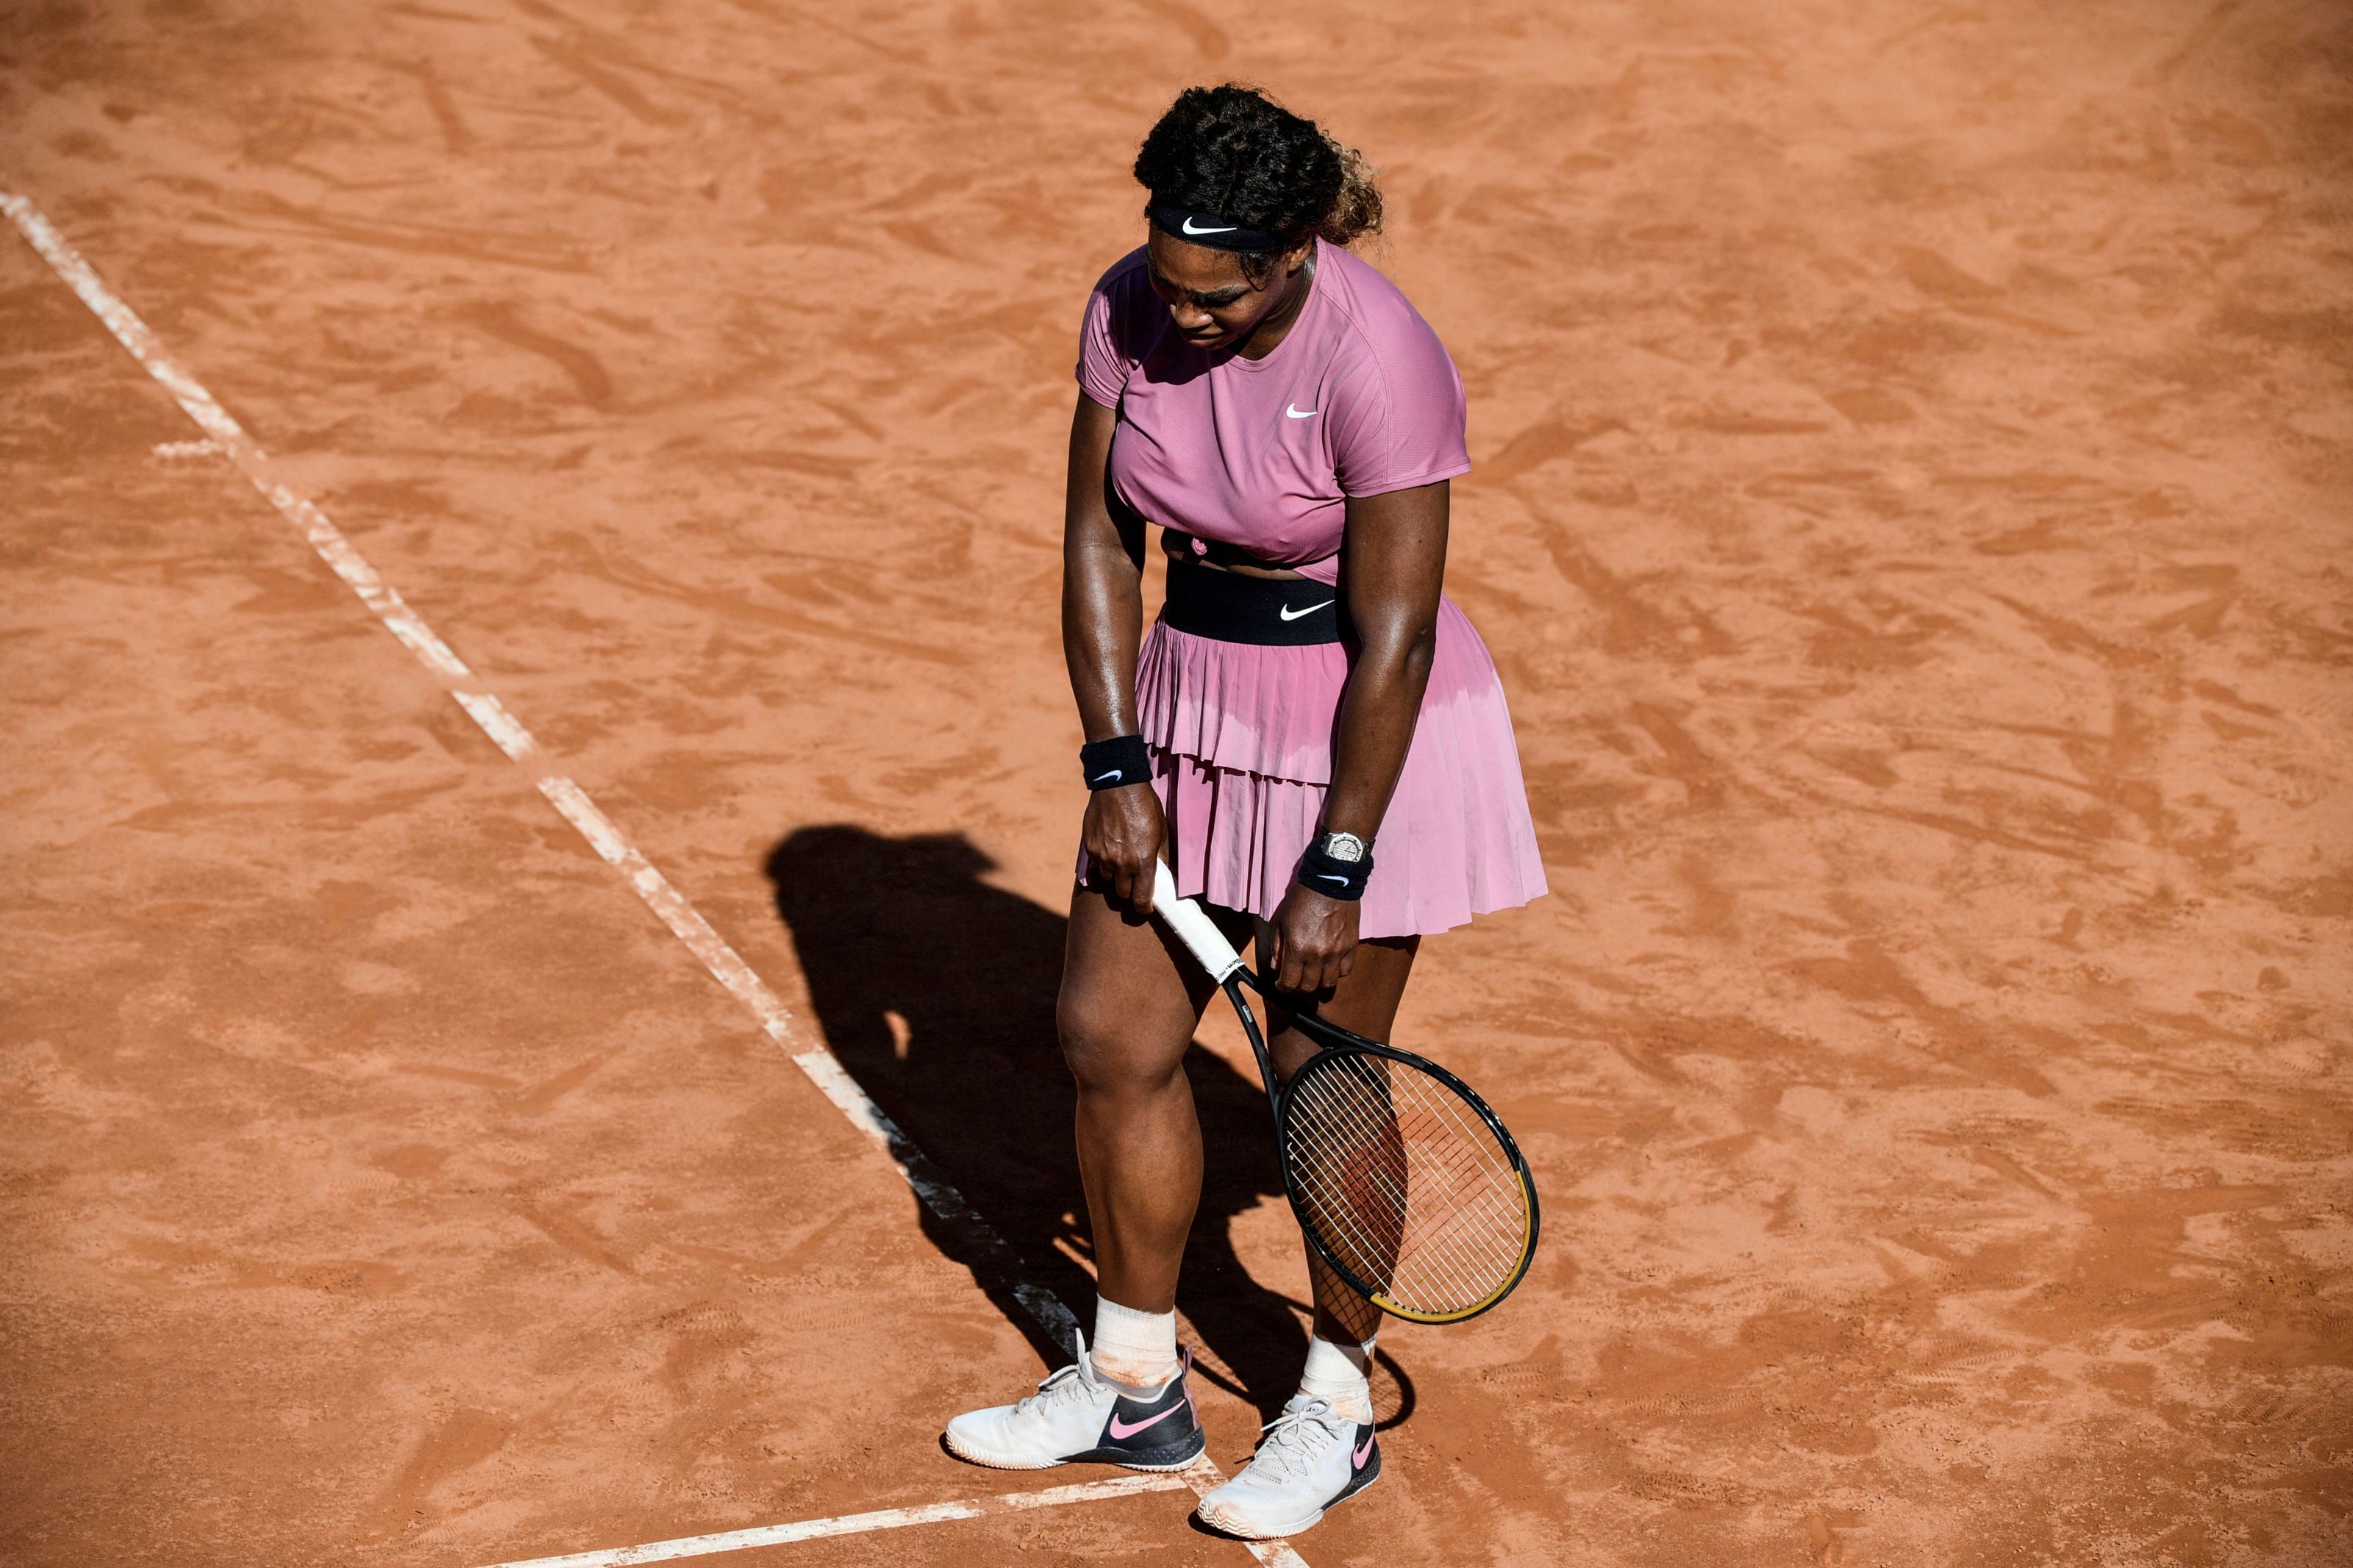 Coco Gaff during the WTA Tennis Open tournament at the Foro Italico News  Photo - Getty Images